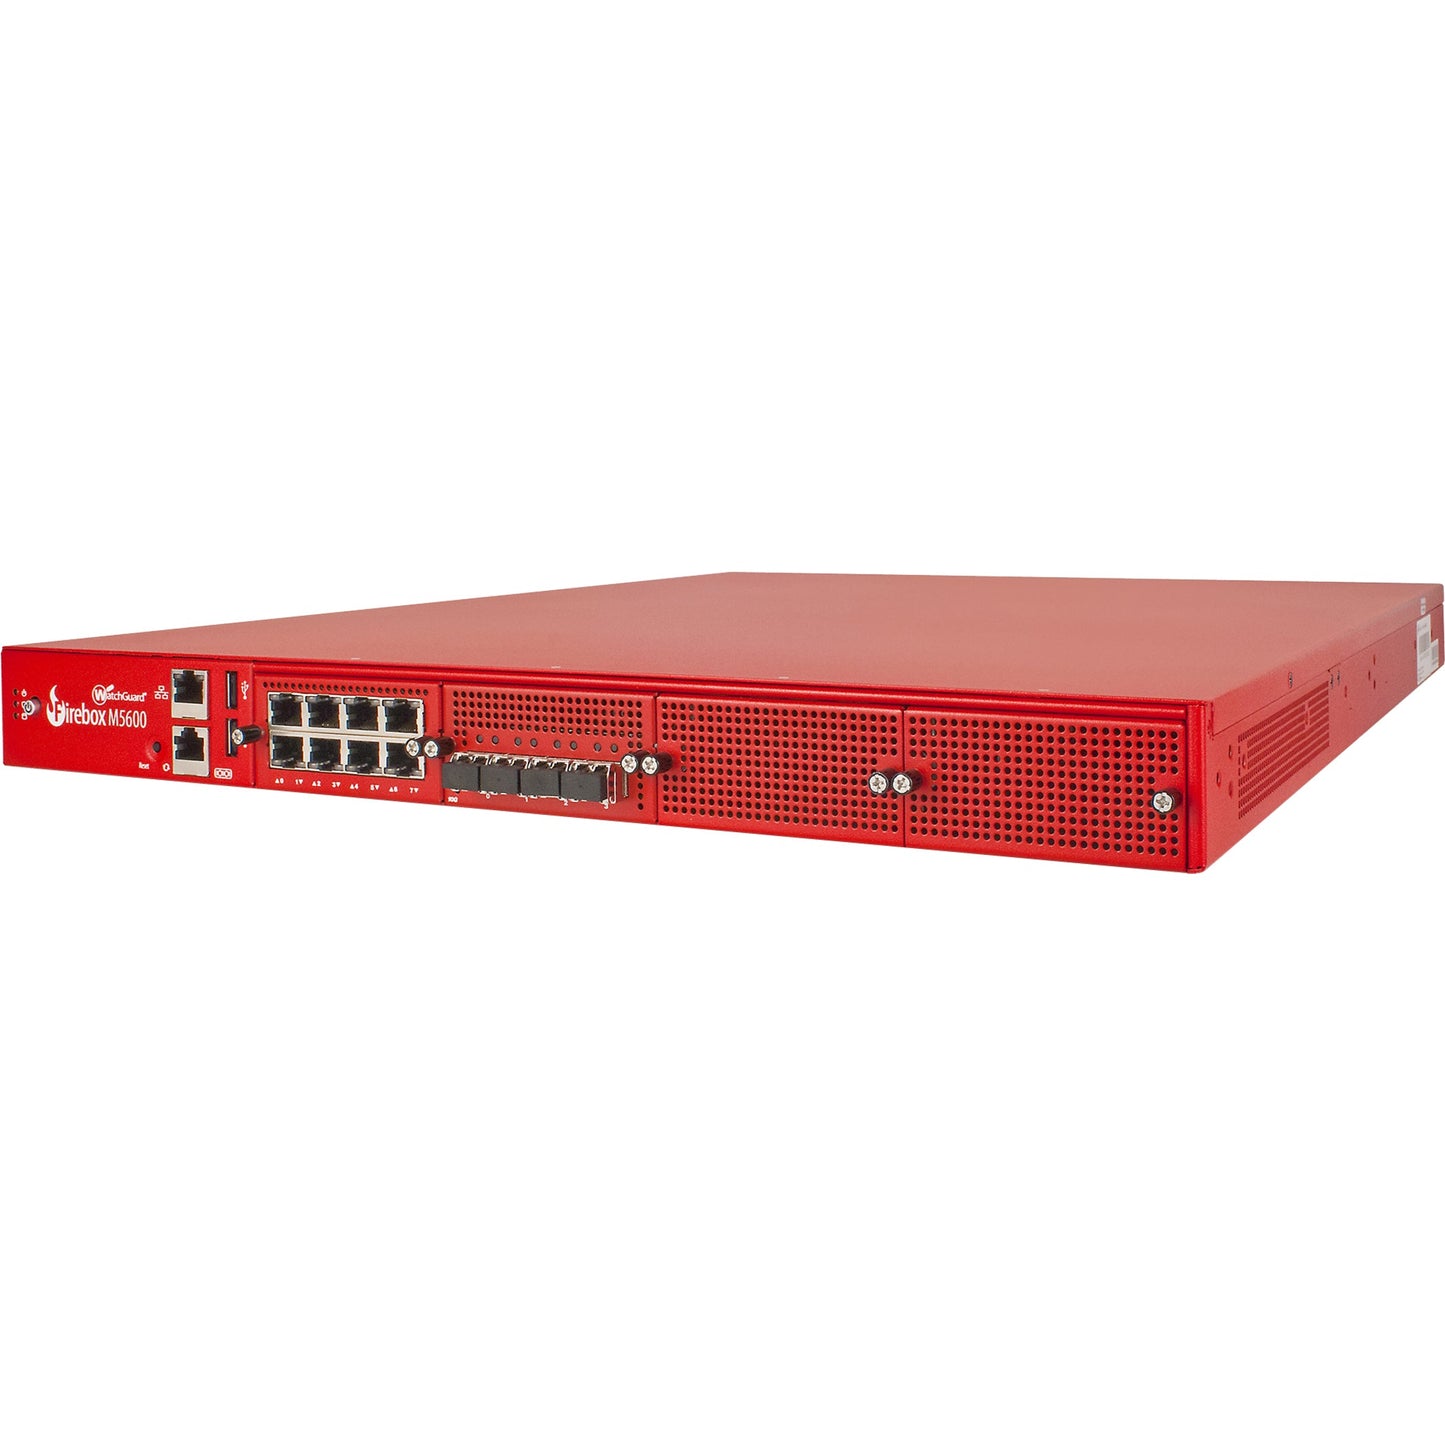 Competitive Trade Into WatchGuard Firebox M5600 with 3-yr Basic Security Suite